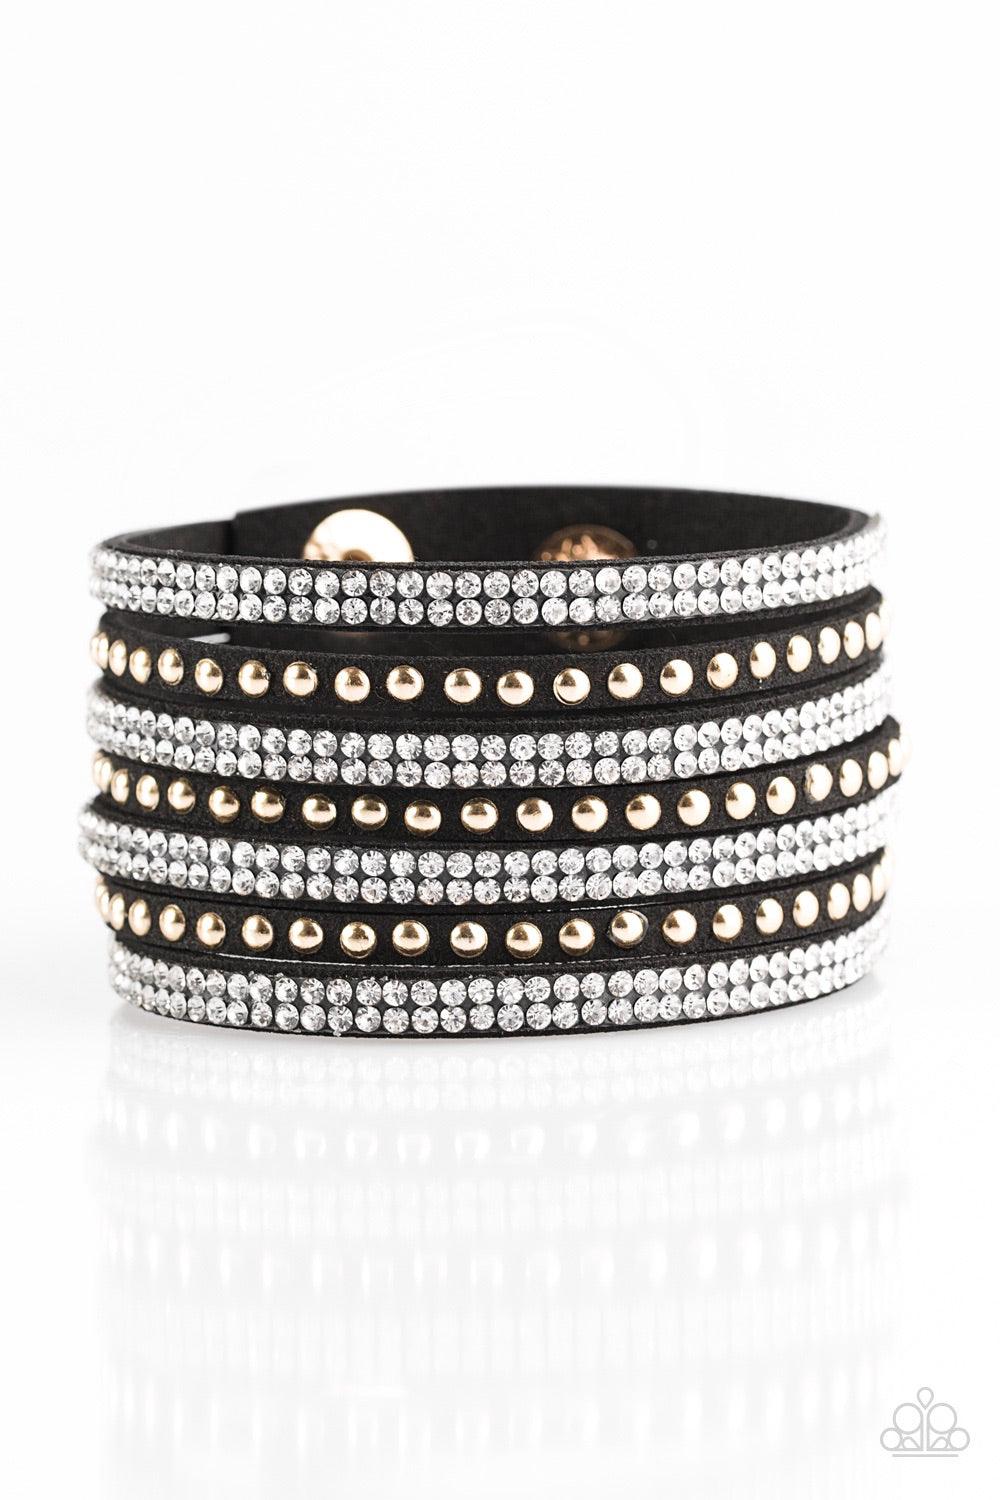 Paparazzi Accessories Victory Shine - Black Shiny gold studs and rows of glittery white rhinestones are encrusted along strips of black suede, creating sassy shimmer around the wrist. Features an adjustable snap closure. Jewelry